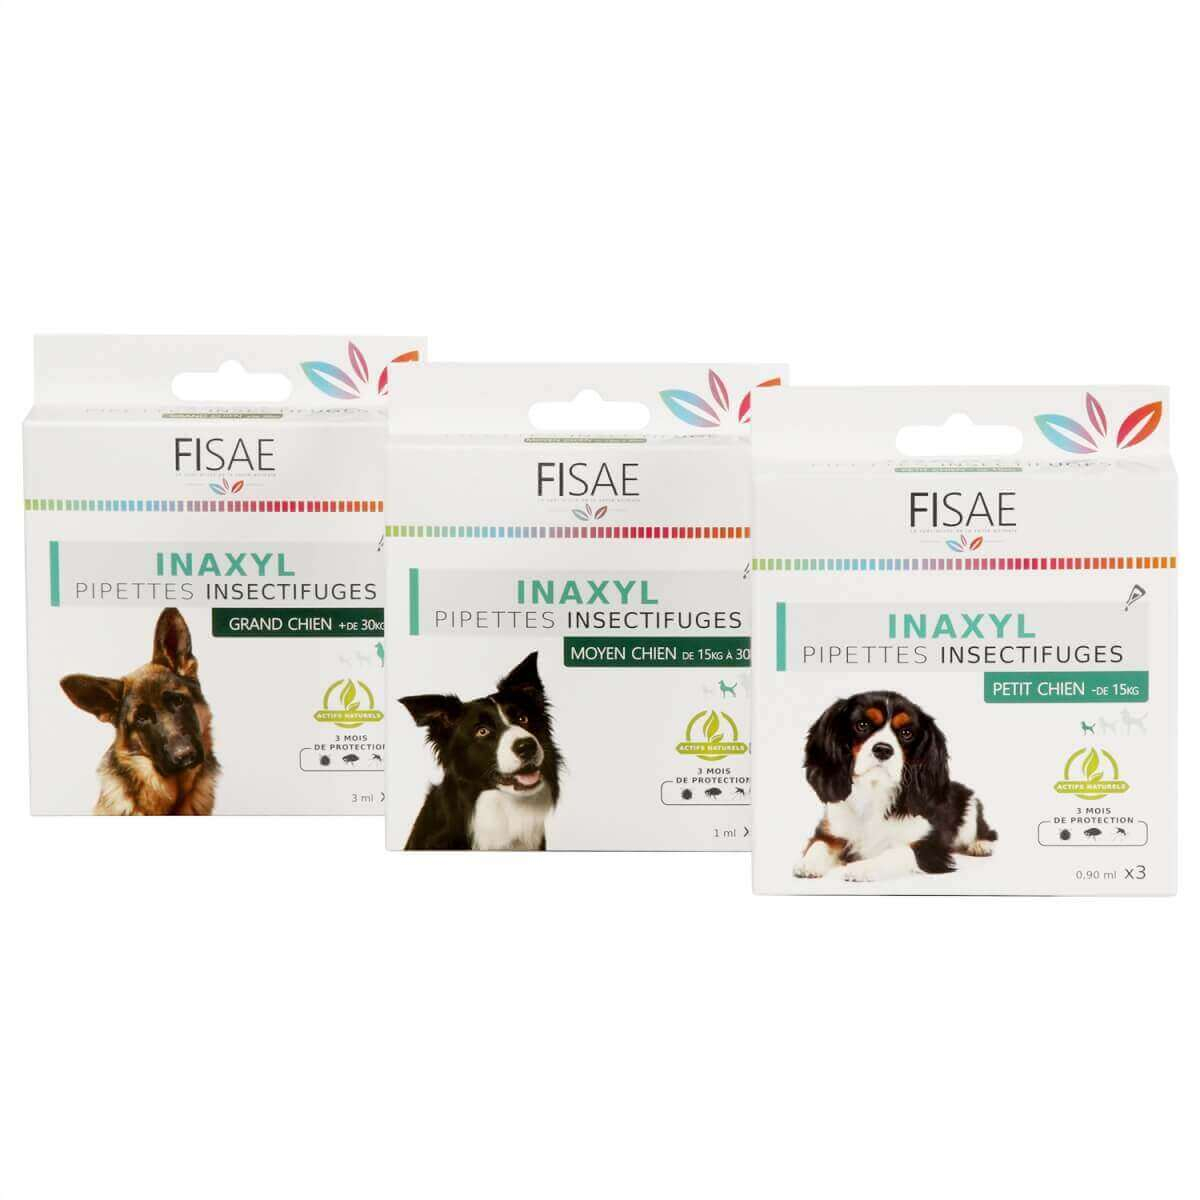 Pipette Insectifuge chien FISAE INAXYL - Innovation : 4 actifs naturels 